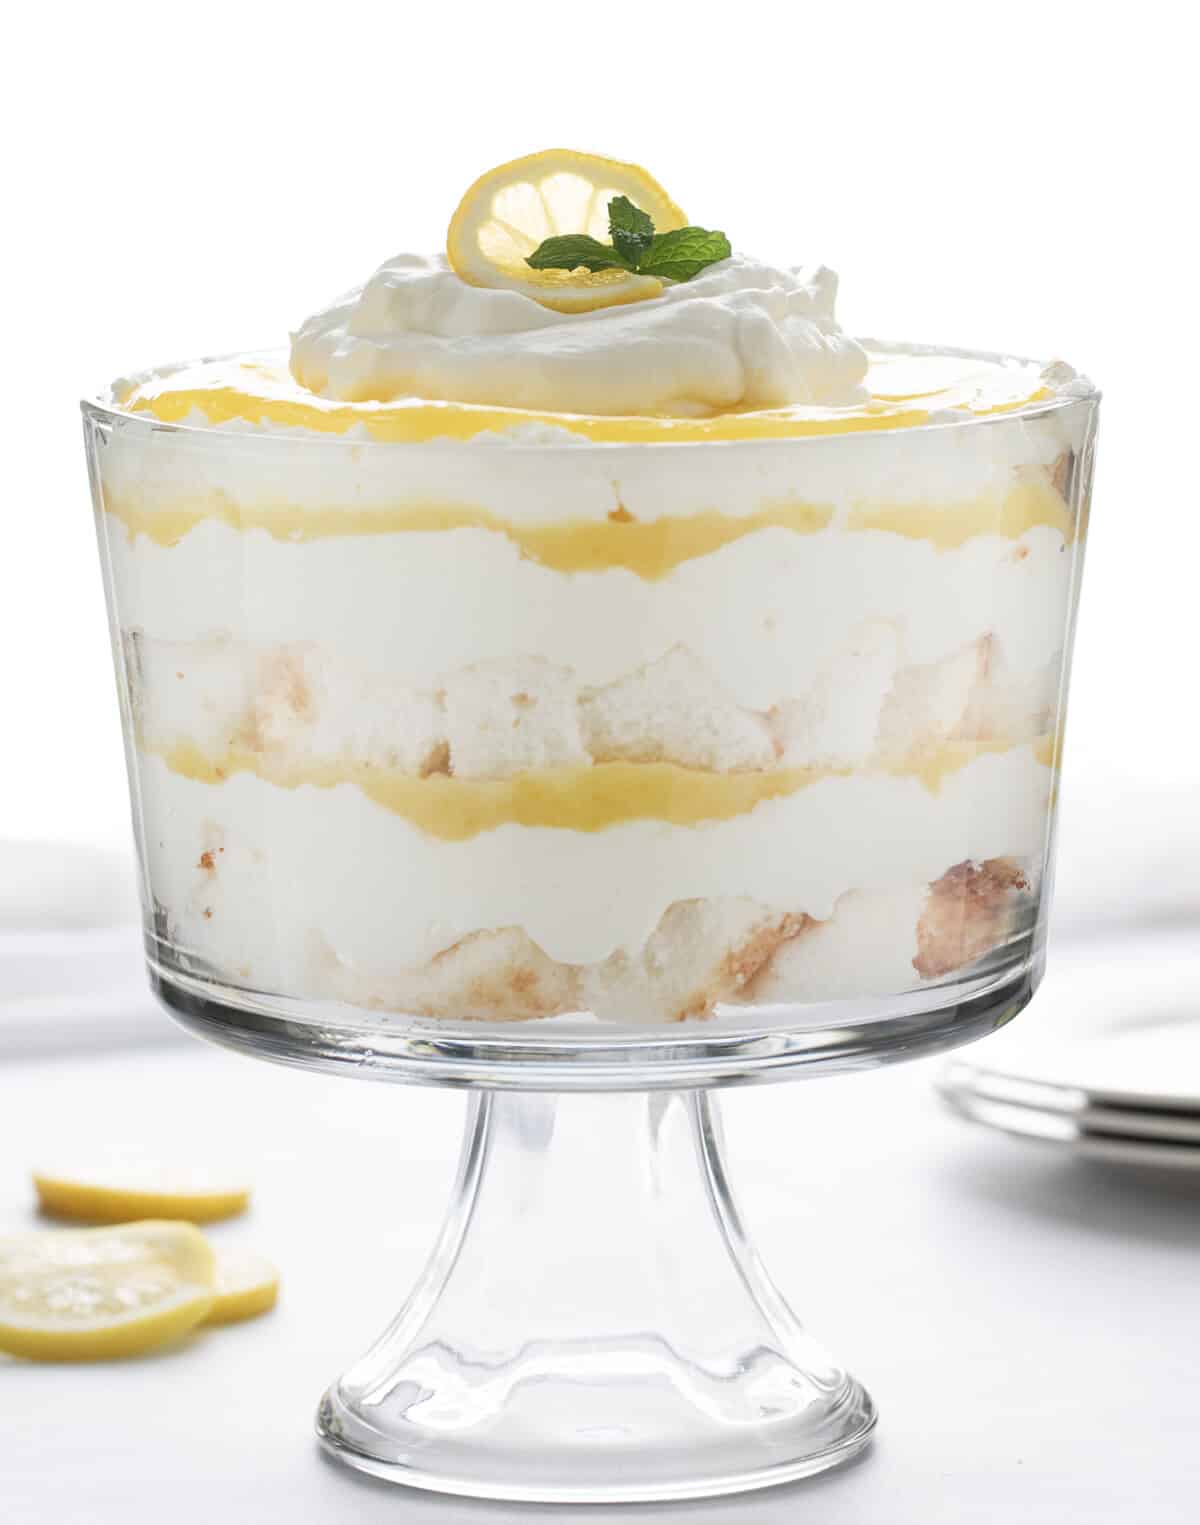 A Lemon Cream Trifle in a Glass Trifle Dish on a White Counter with Lemons and Plates.